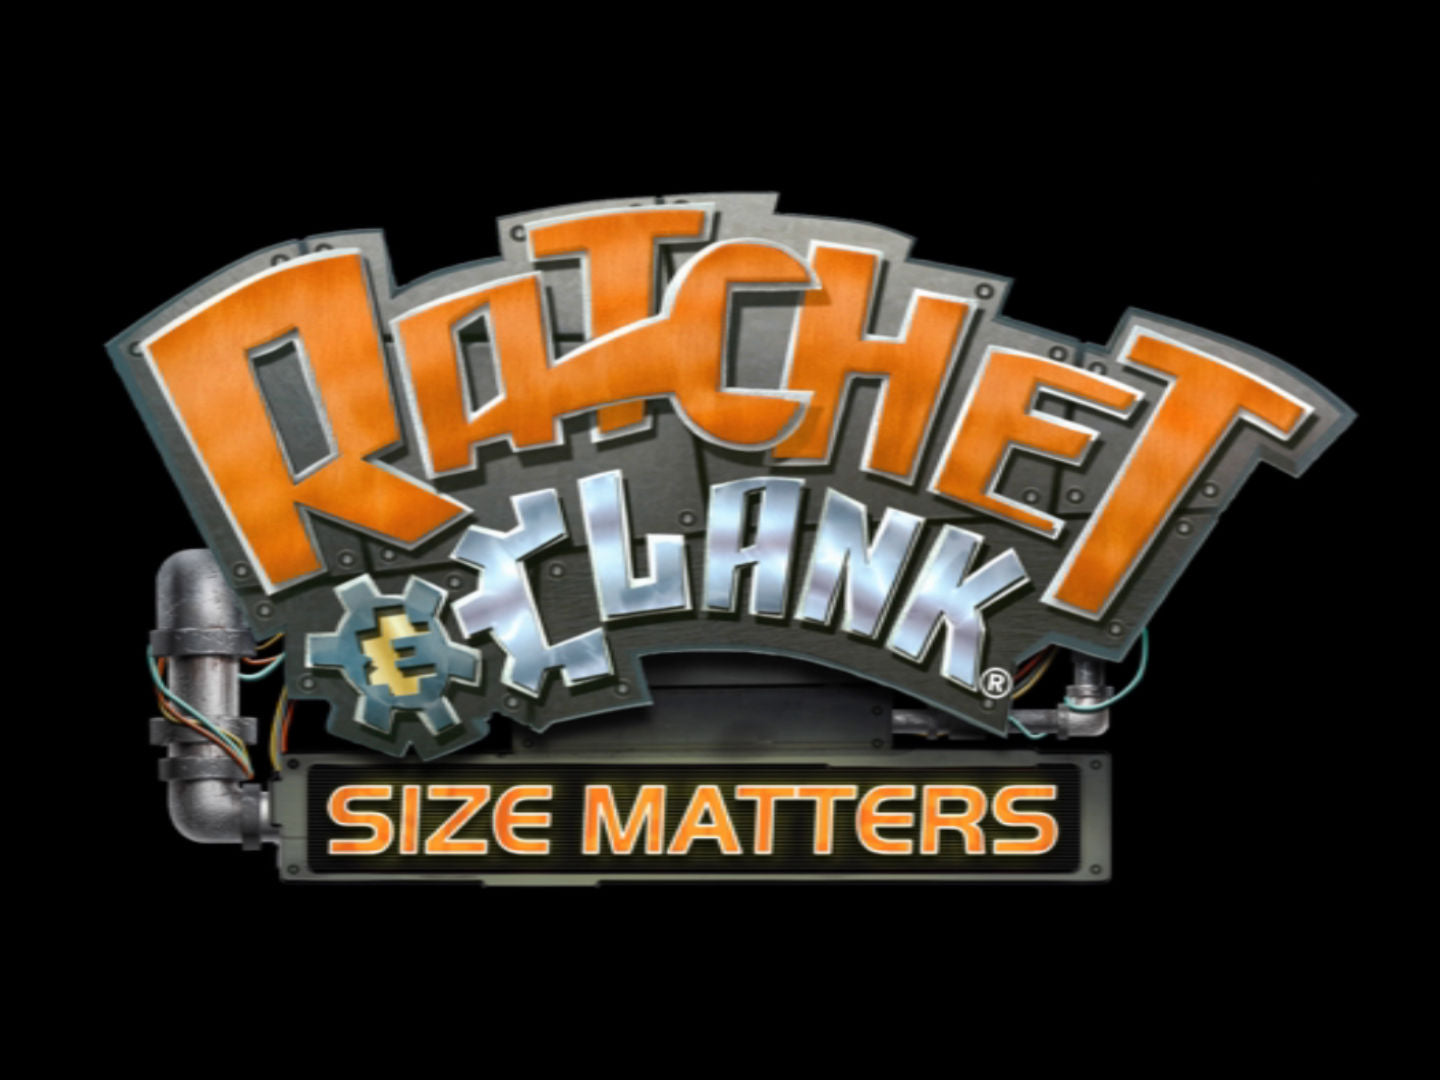 Ratchet & Clank: Size Matters - PlayStation 2 (PS2) Game